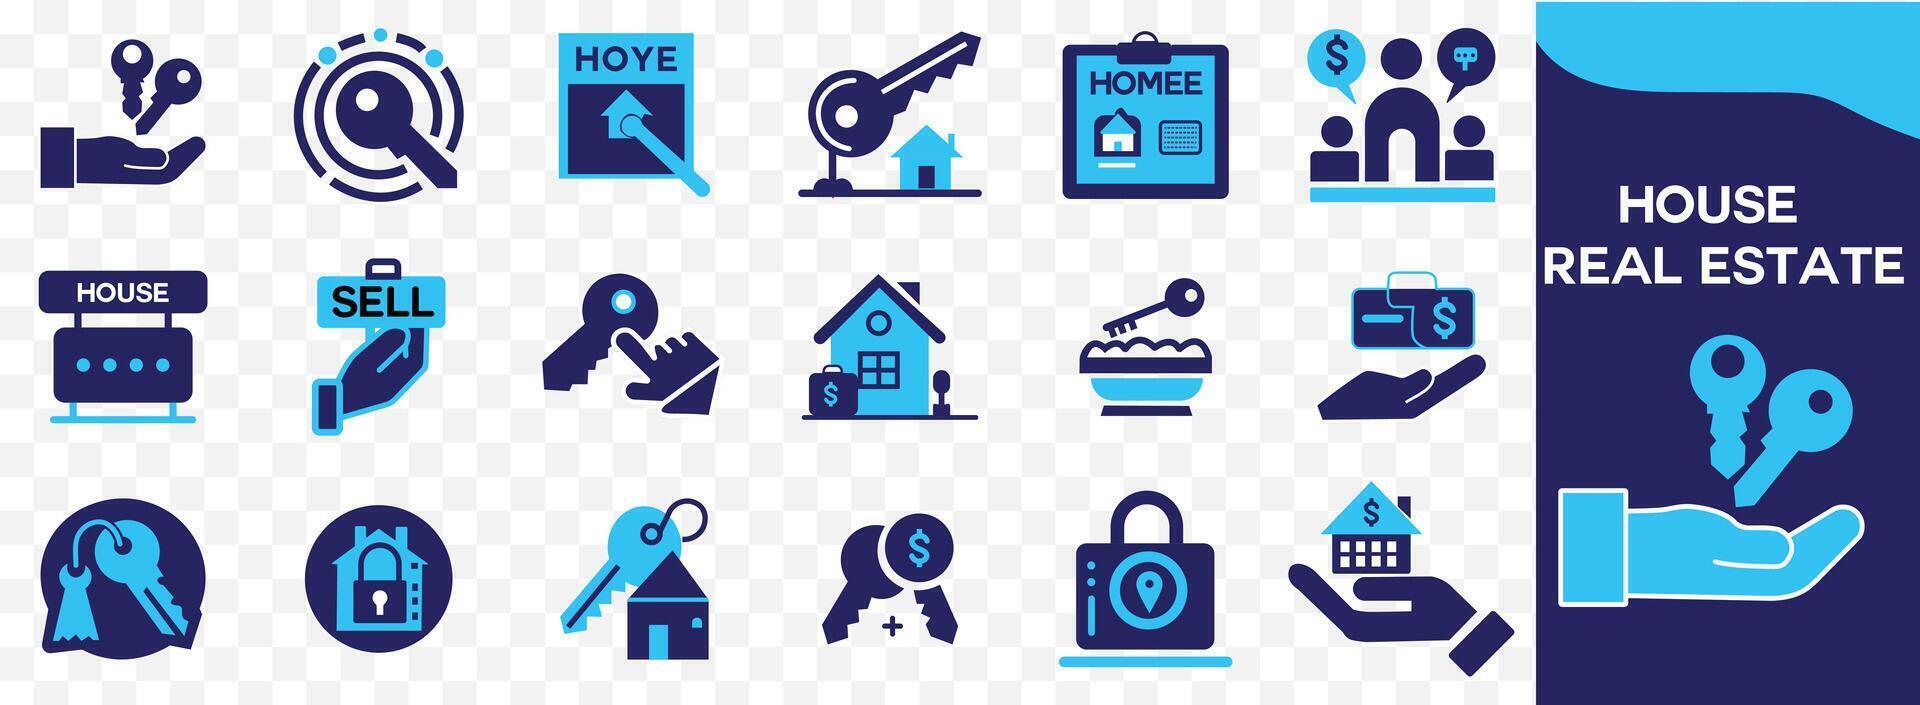 House or Real estate icon set. Containing house, key, buy, sell, loan, smart home, building, mortgage, address, renovation, land, kitchen, bedroom, living room, bathroom. Solid icon vector collection